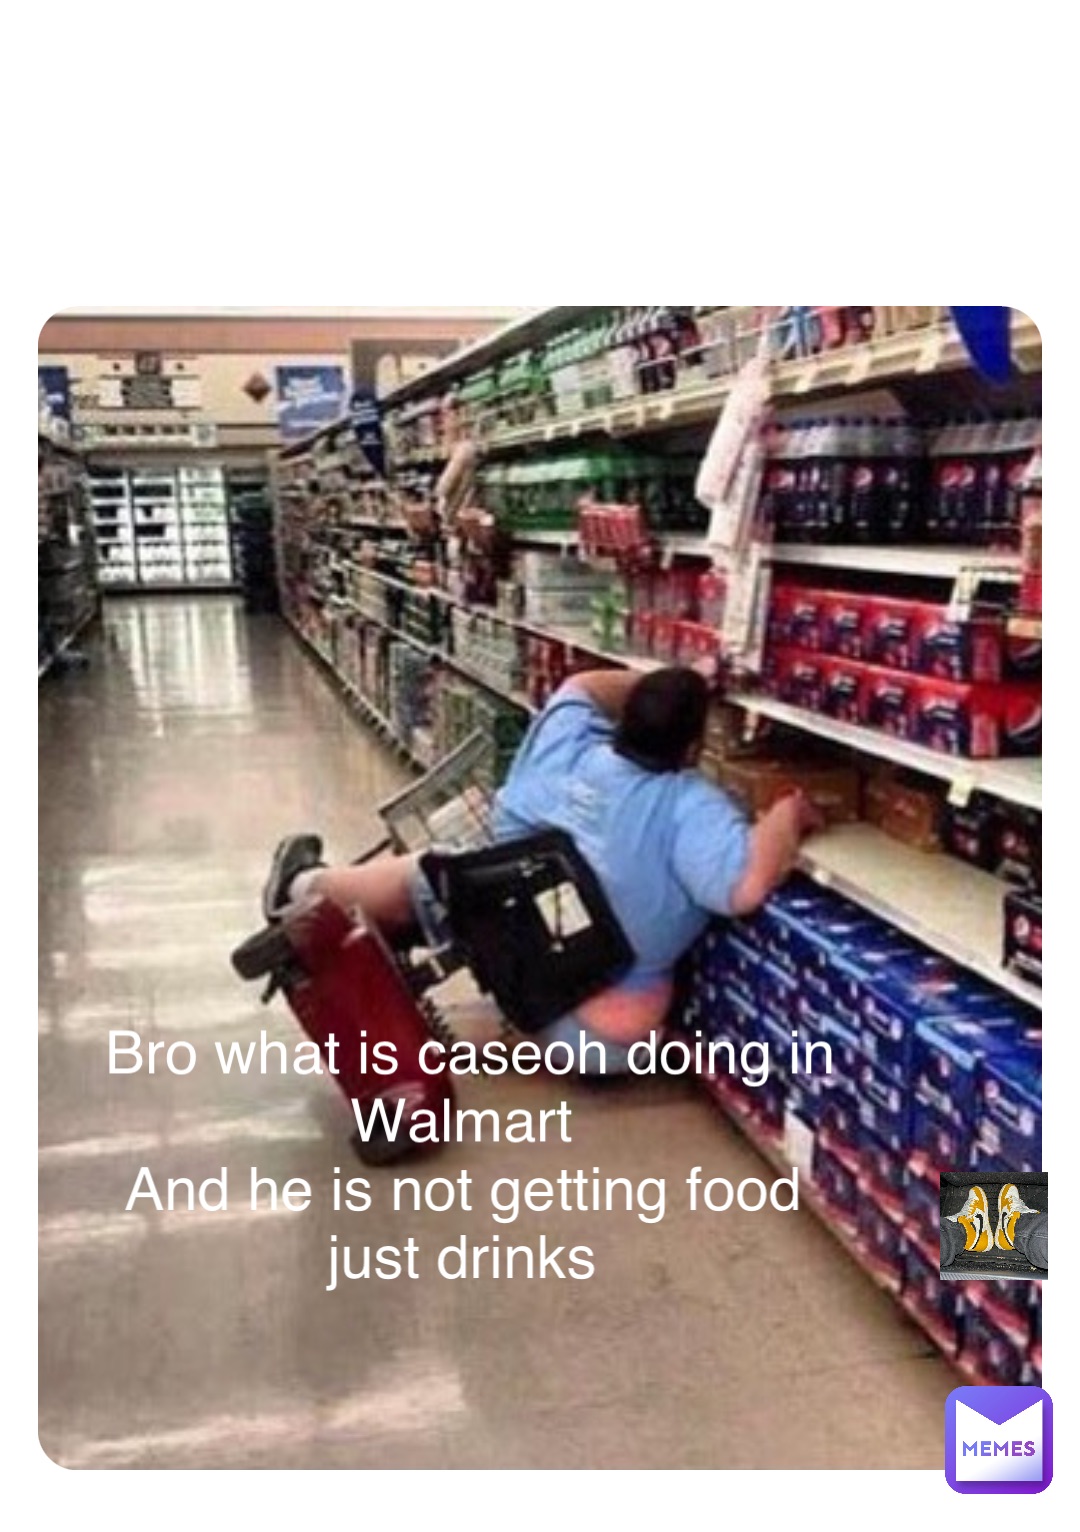 Double tap to edit Bro what is caseoh doing in Walmart And he is not getting food just drinks